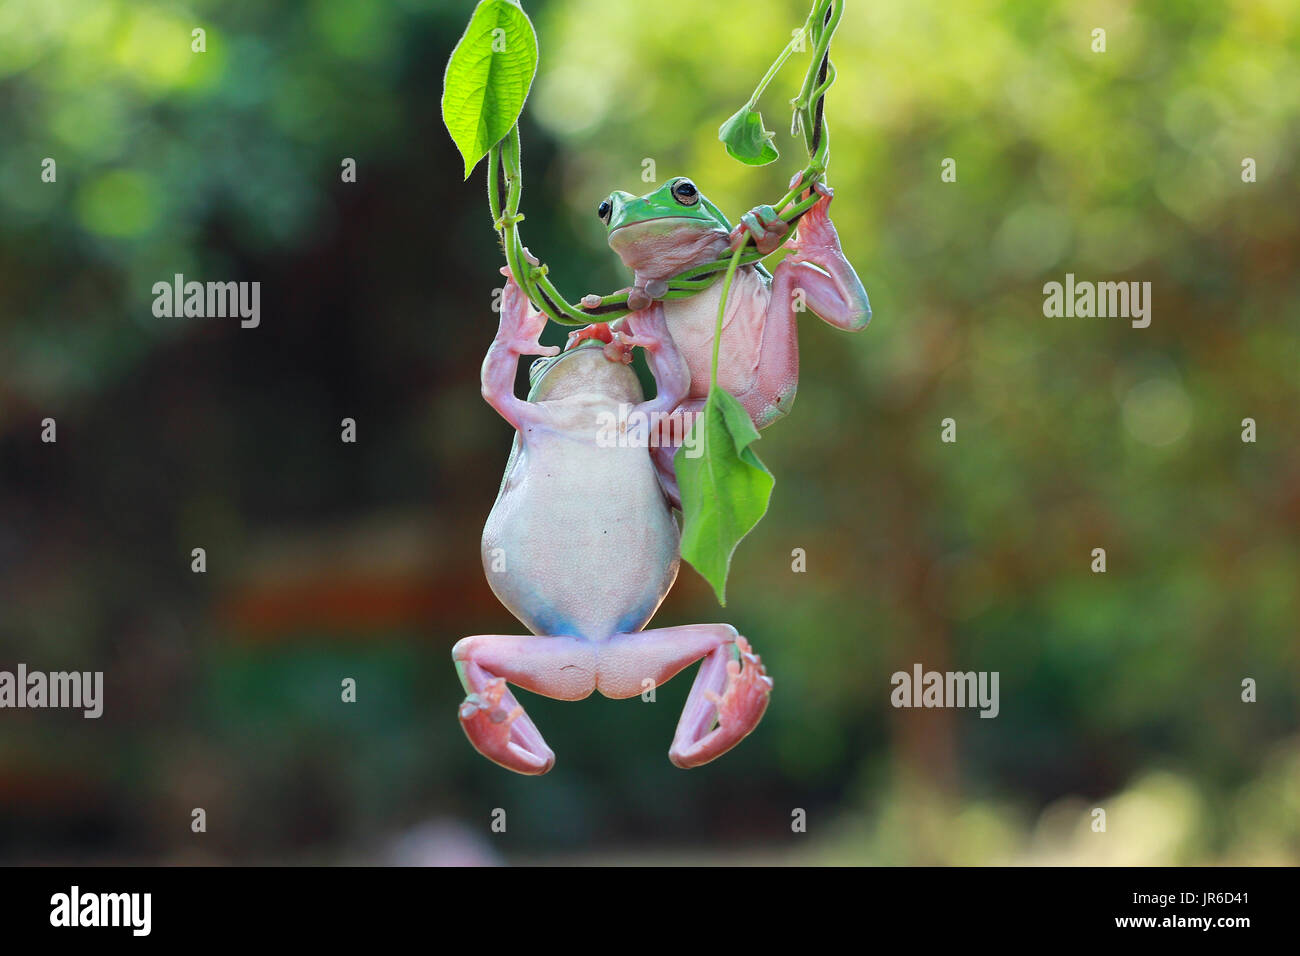 Two Dumpy frogs on a plant, Indonesia Stock Photo